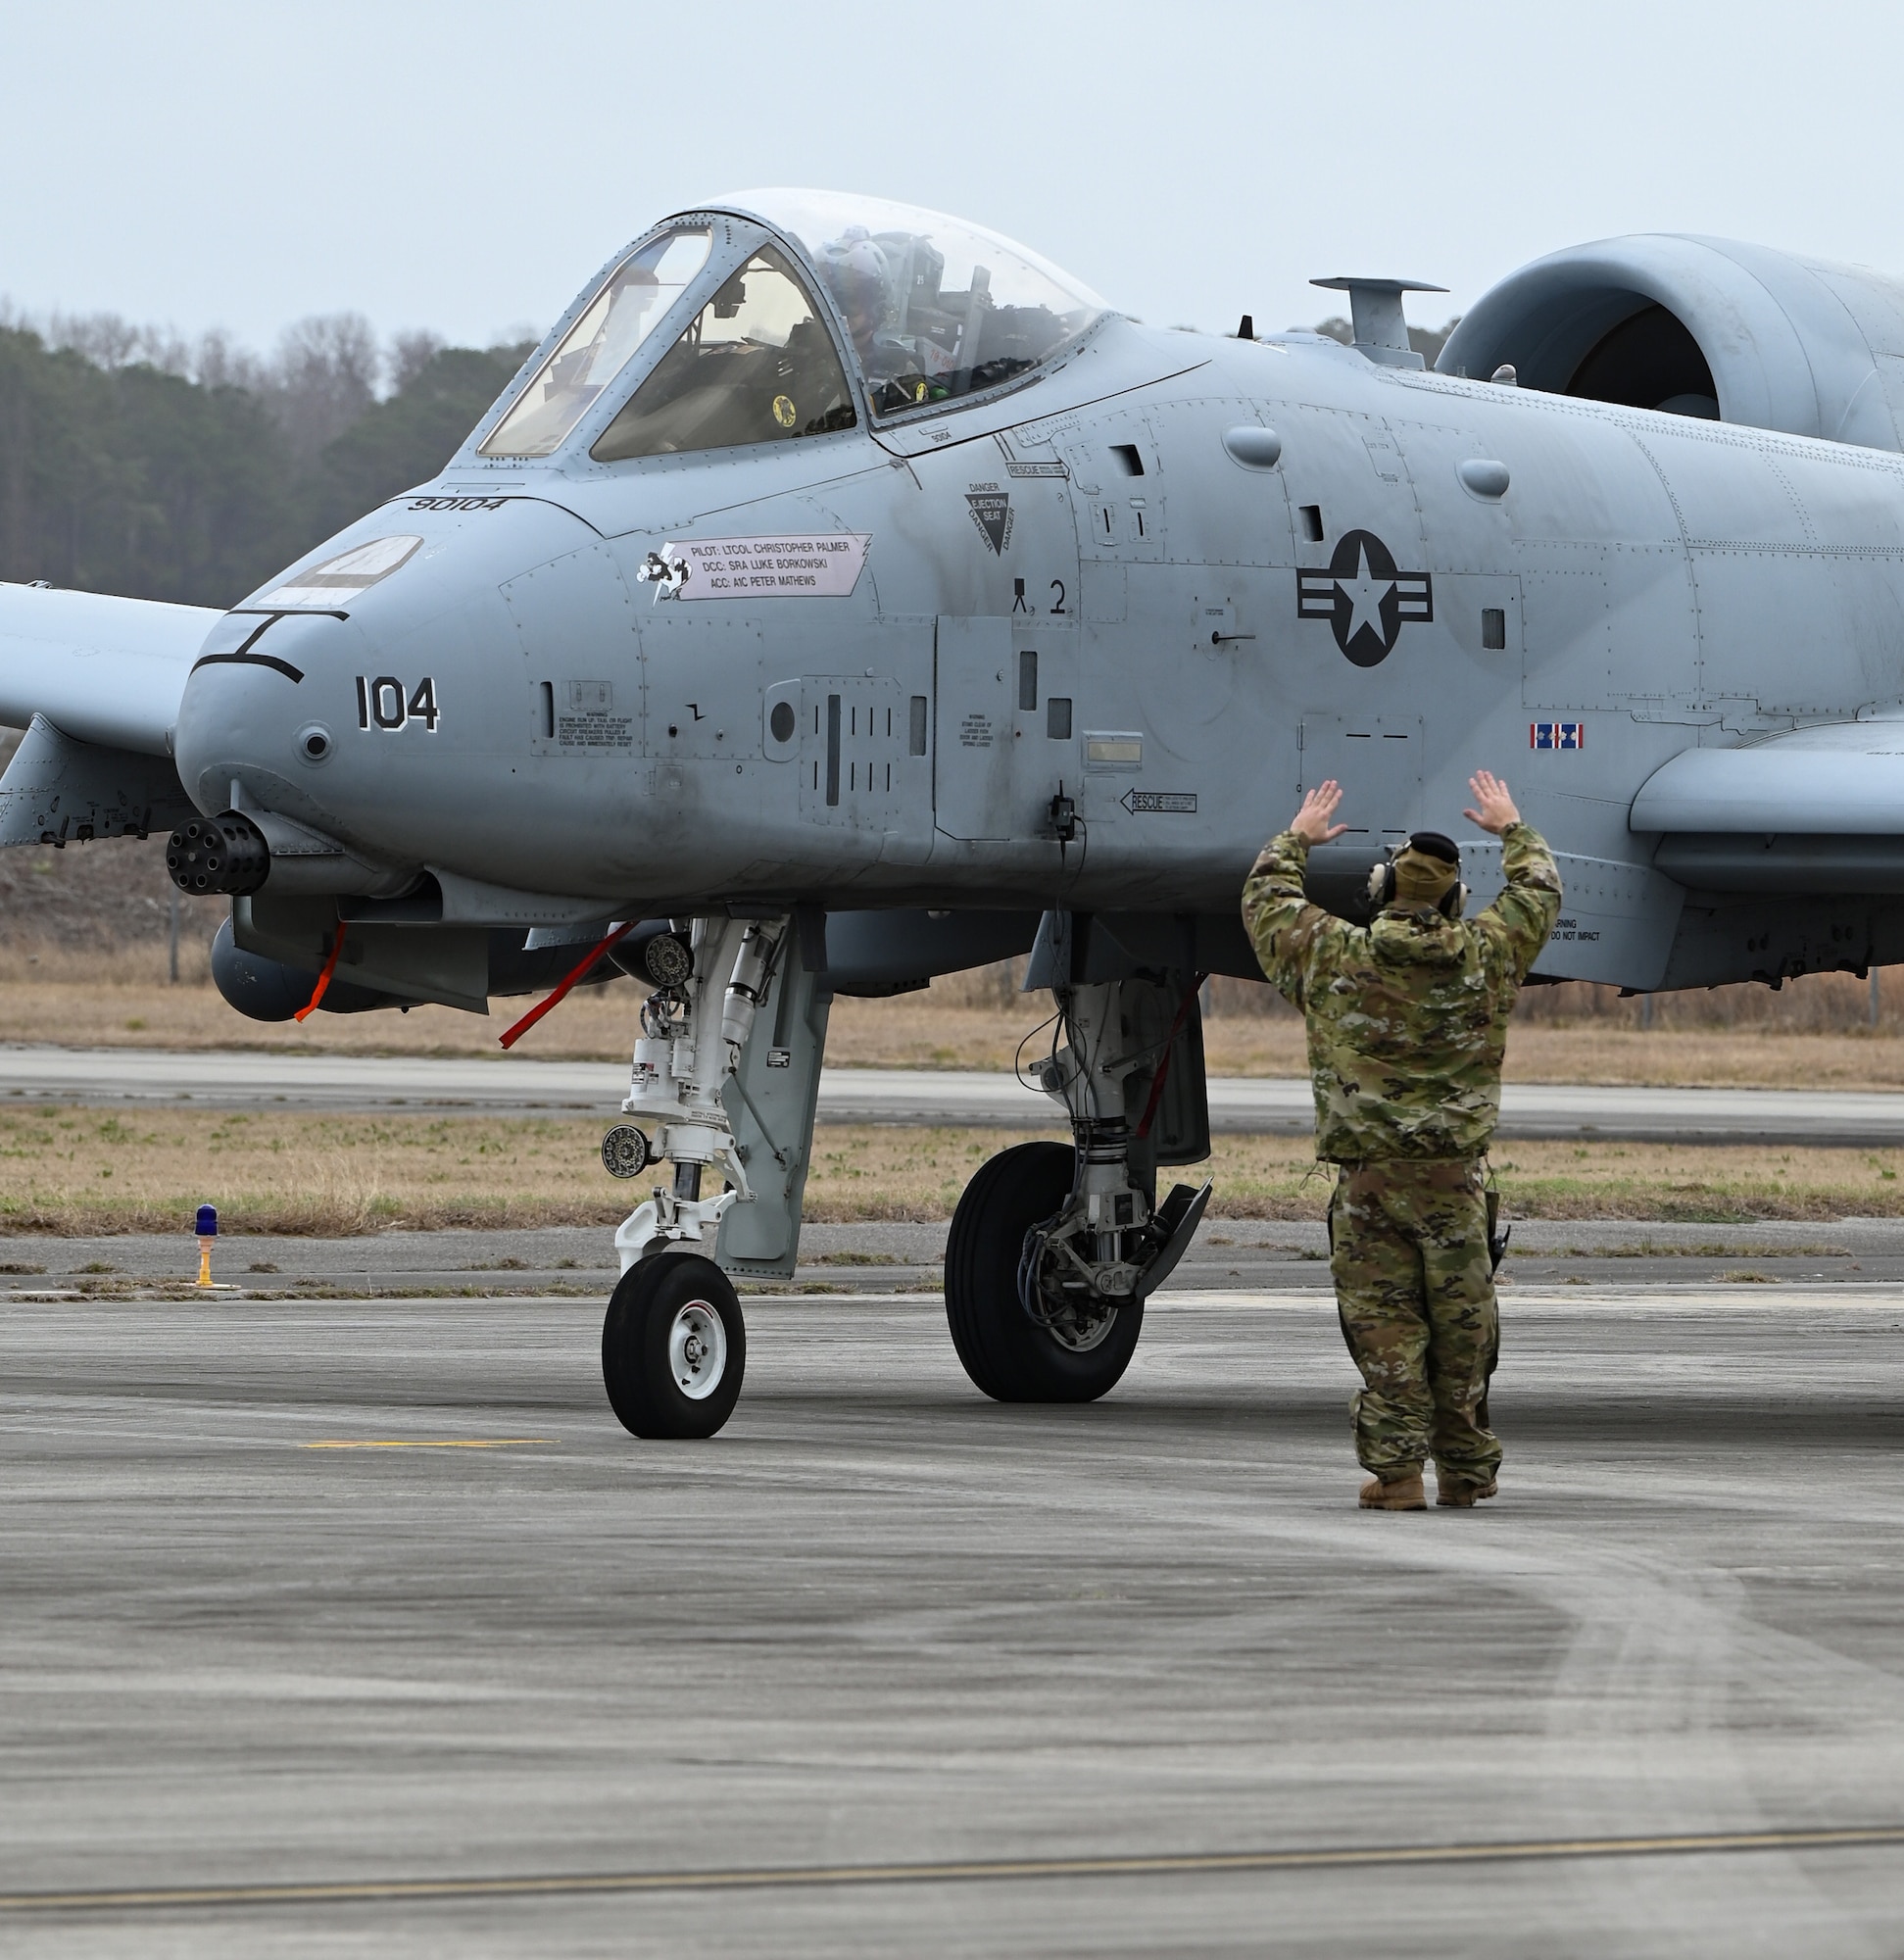 A U.S. Air Force crew chief from the 175th Aircraft Maintenance Squadron, Maryland Air National Guard, guides an A-10C Thunderbolt II aircraft on the flight line at Hunter Army Airfield, Georgia, Jan. 25, 2023, to support exercise Sunshine Rescue. The goal of the exercise is to execute traditional Combat Search and Rescue capabilities with forward-edge ground force tactics, techniques and procedures using advanced command and control technologies.